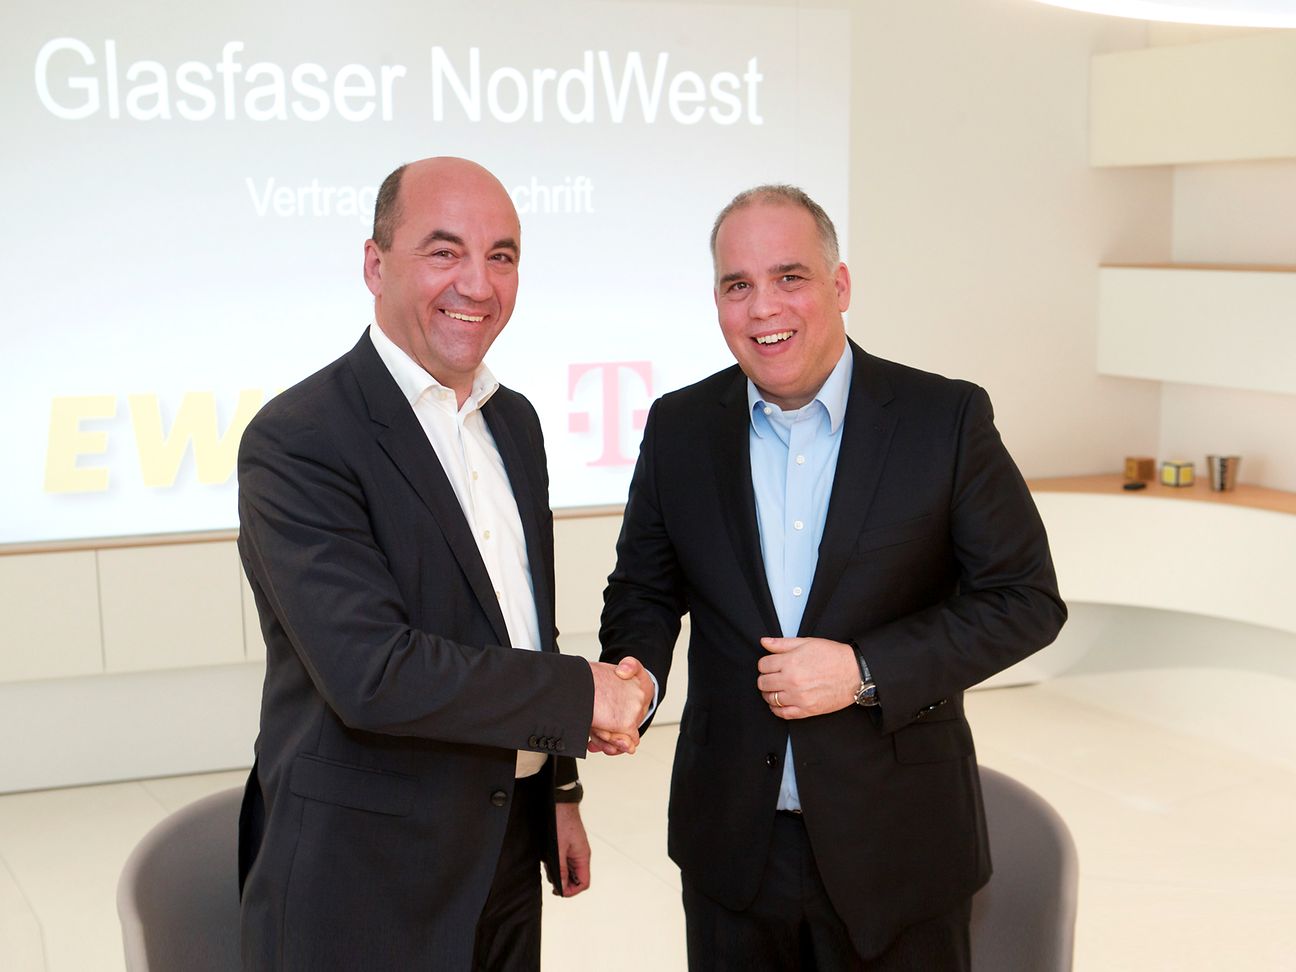 Joint venture Glasfaser NordWest